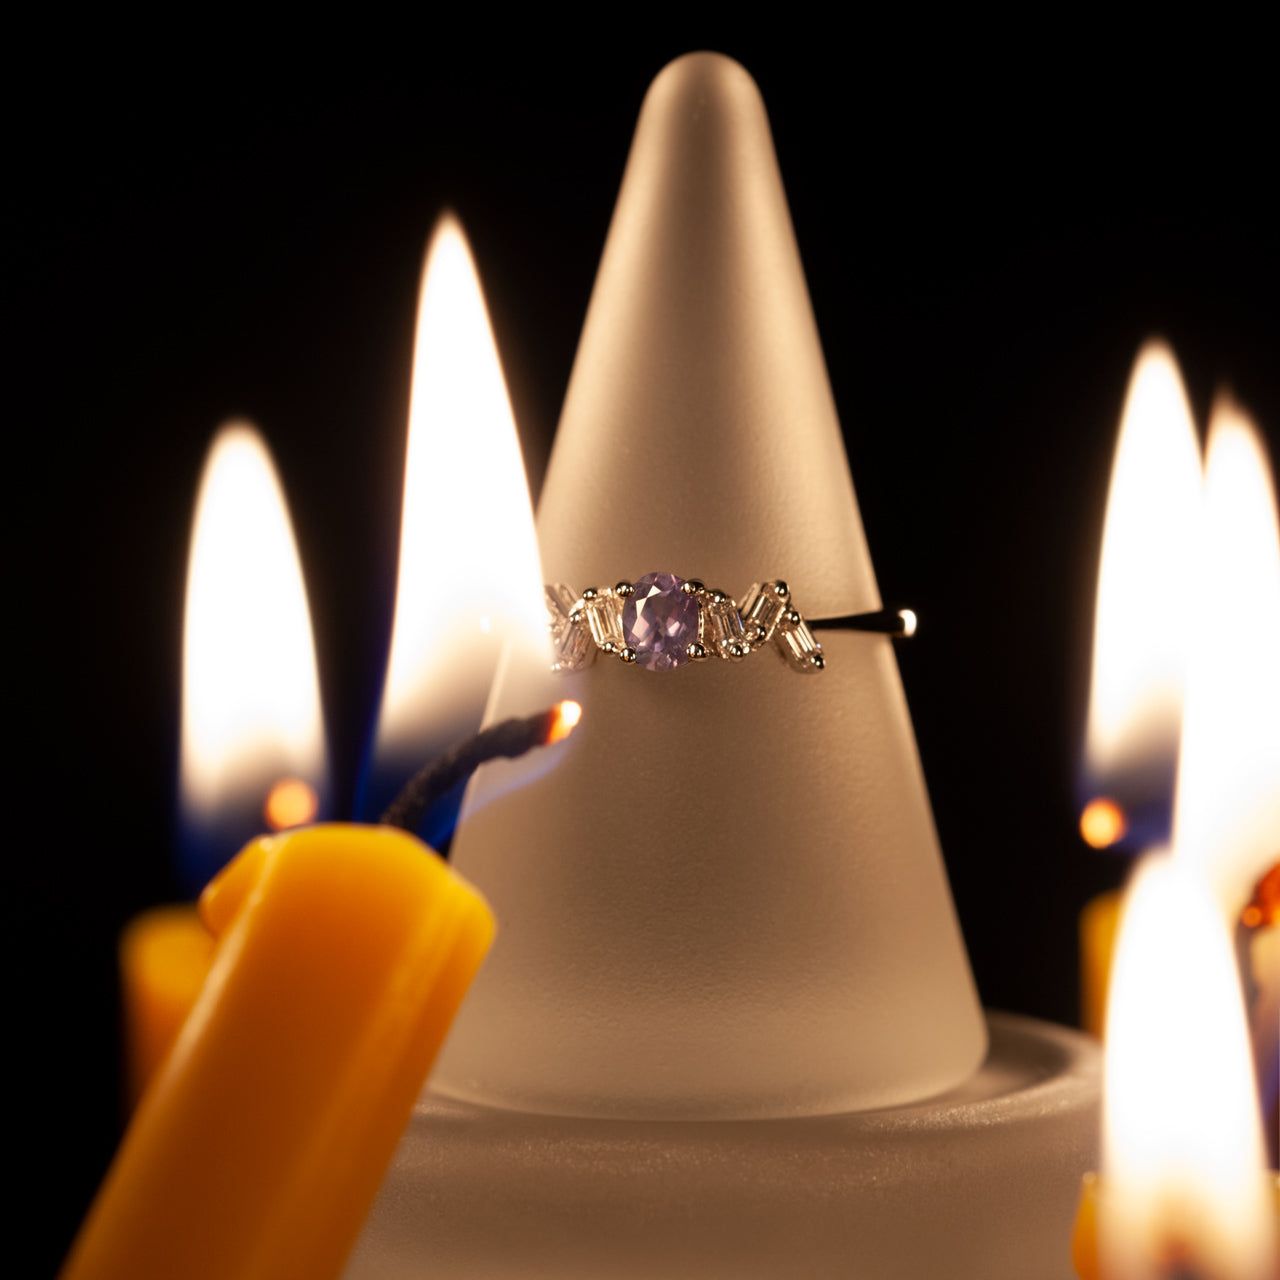 0.35ct alexandrite ring on a candle for a romantic display setting